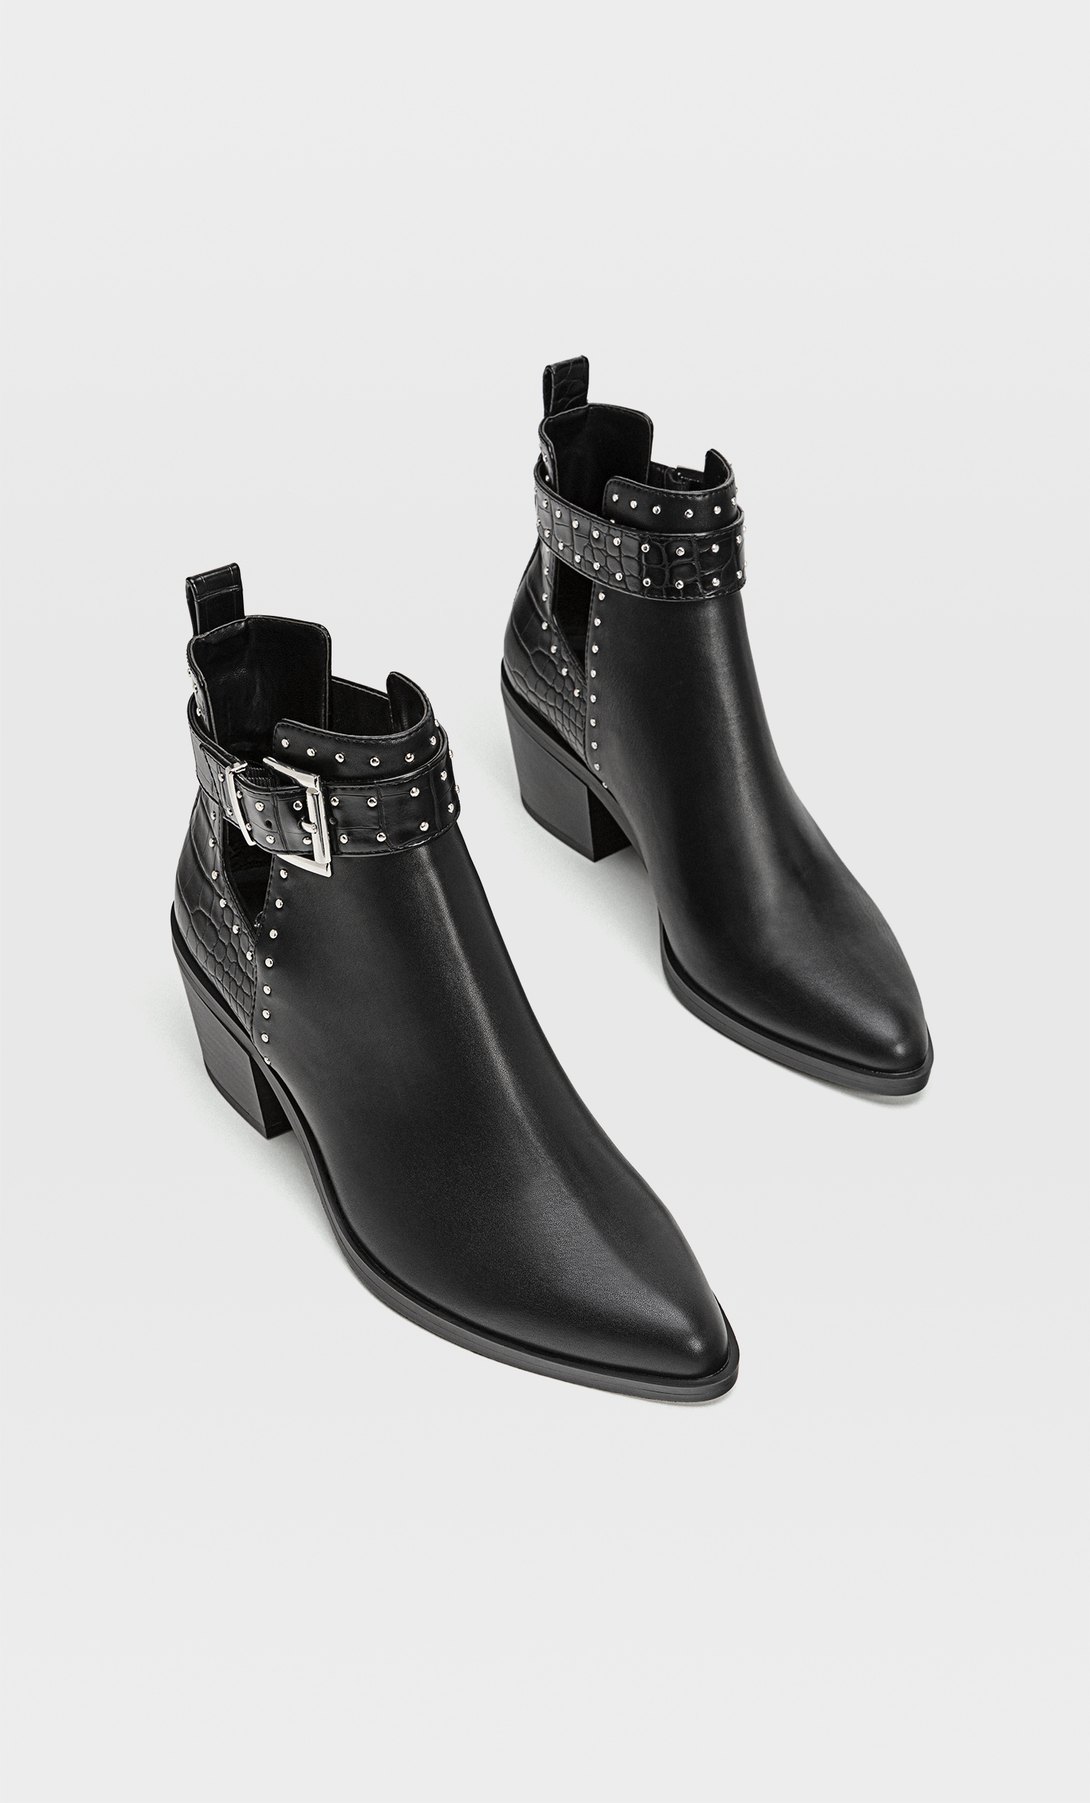 Studded cut-out ankle boots - Women's 